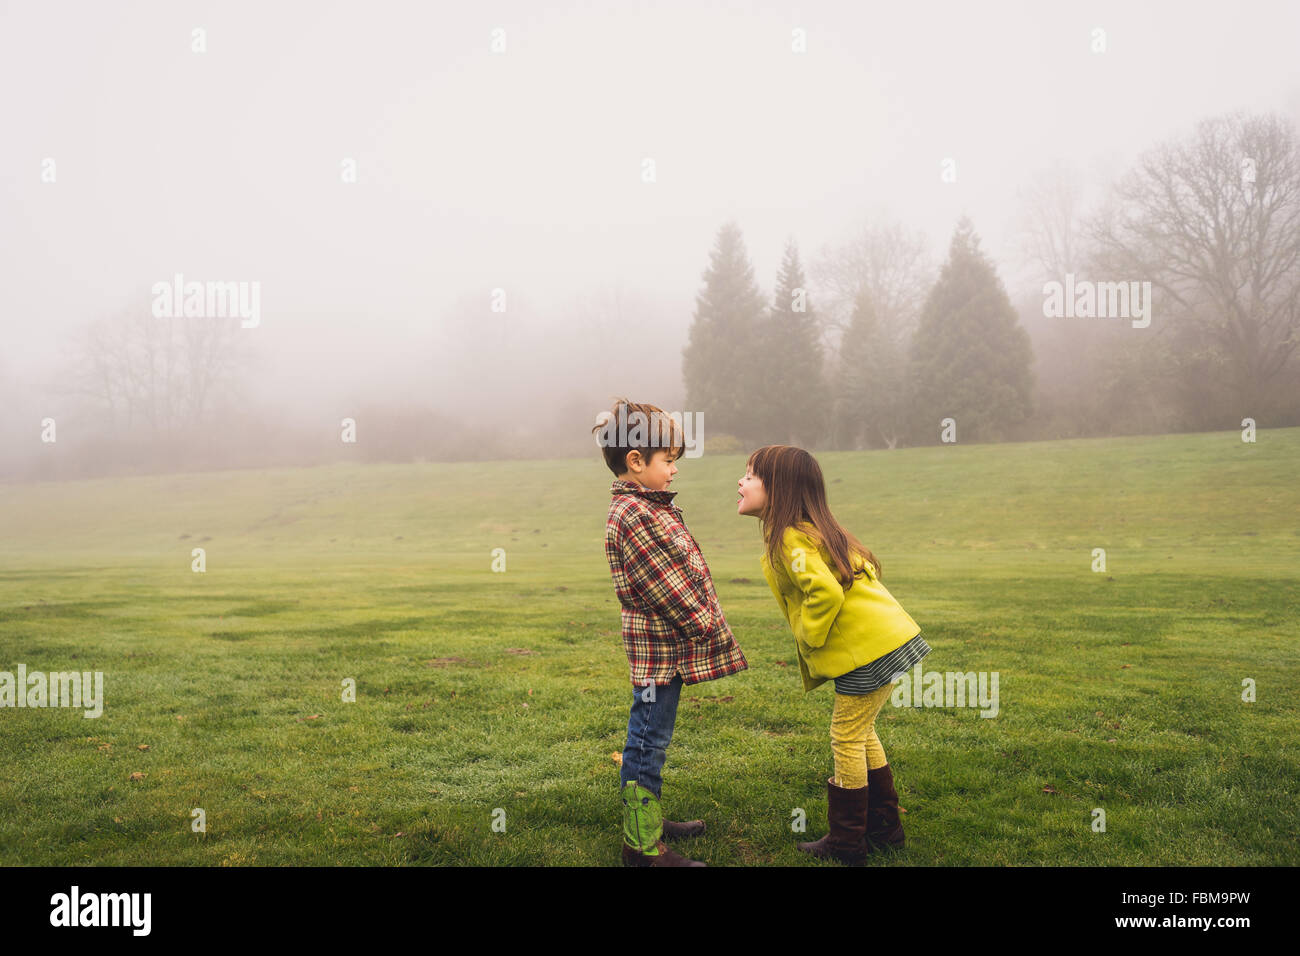 Boy and girl standing face to face in park on a foggy day Stock Photo